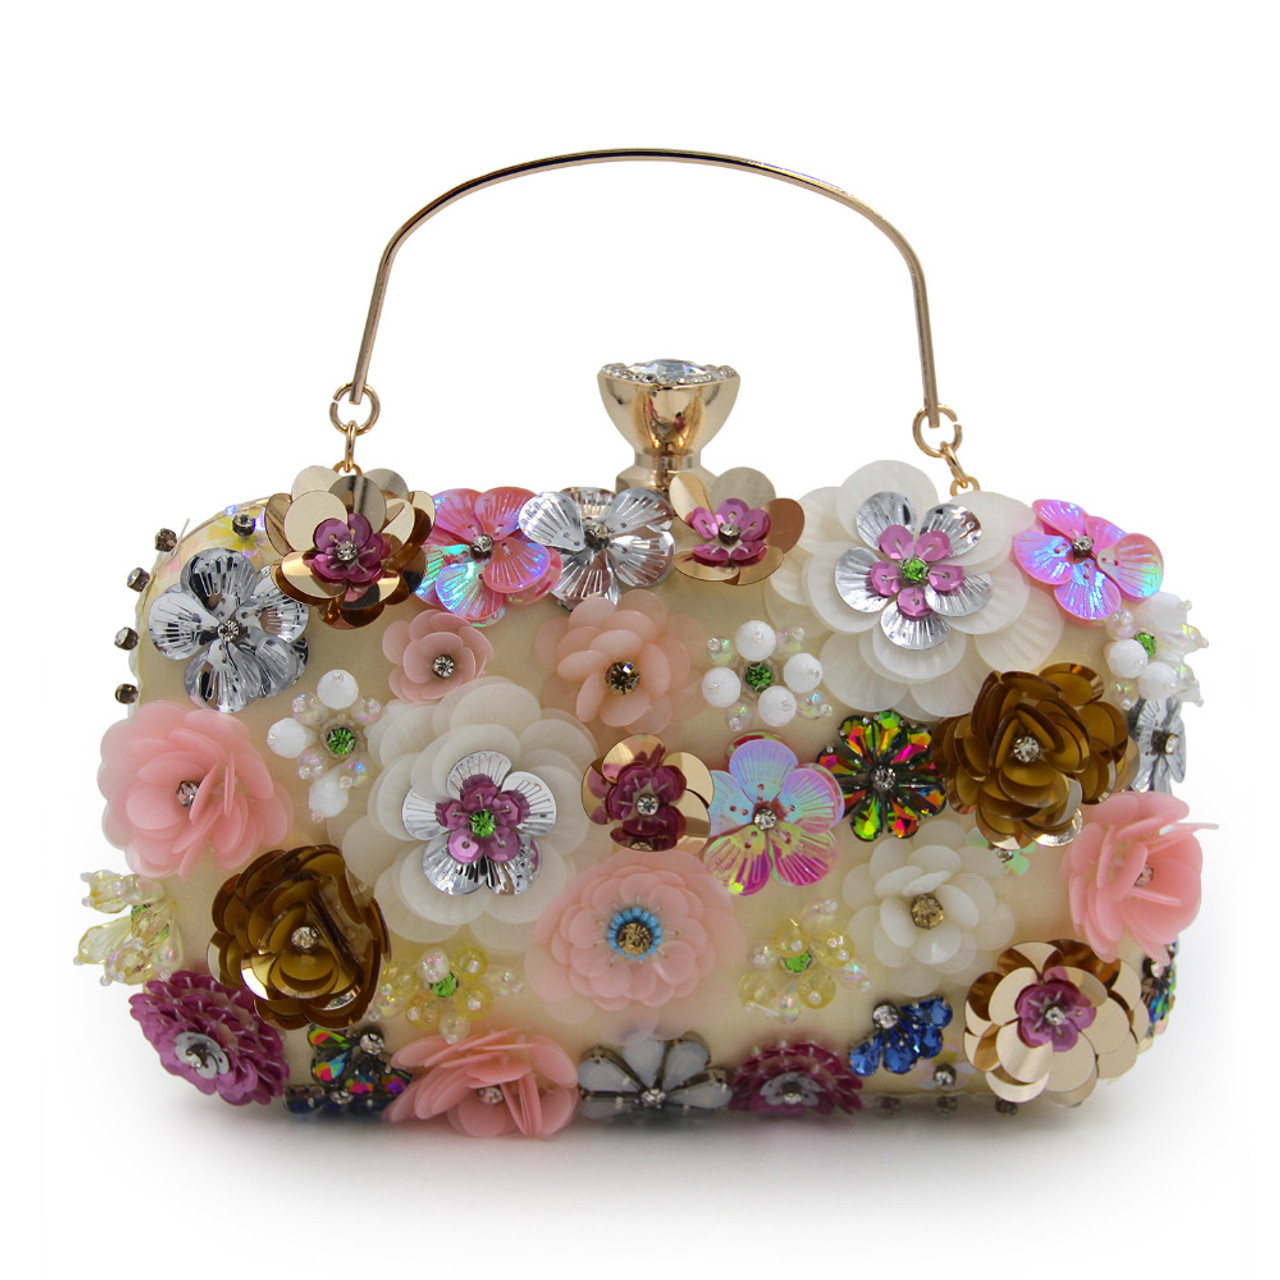 Floral Sequin Lock Clutch Bag Vintage Kissing Lock Satin Purse For Weddings  And Parties From Xianstore05, $17.88 | DHgate.Com